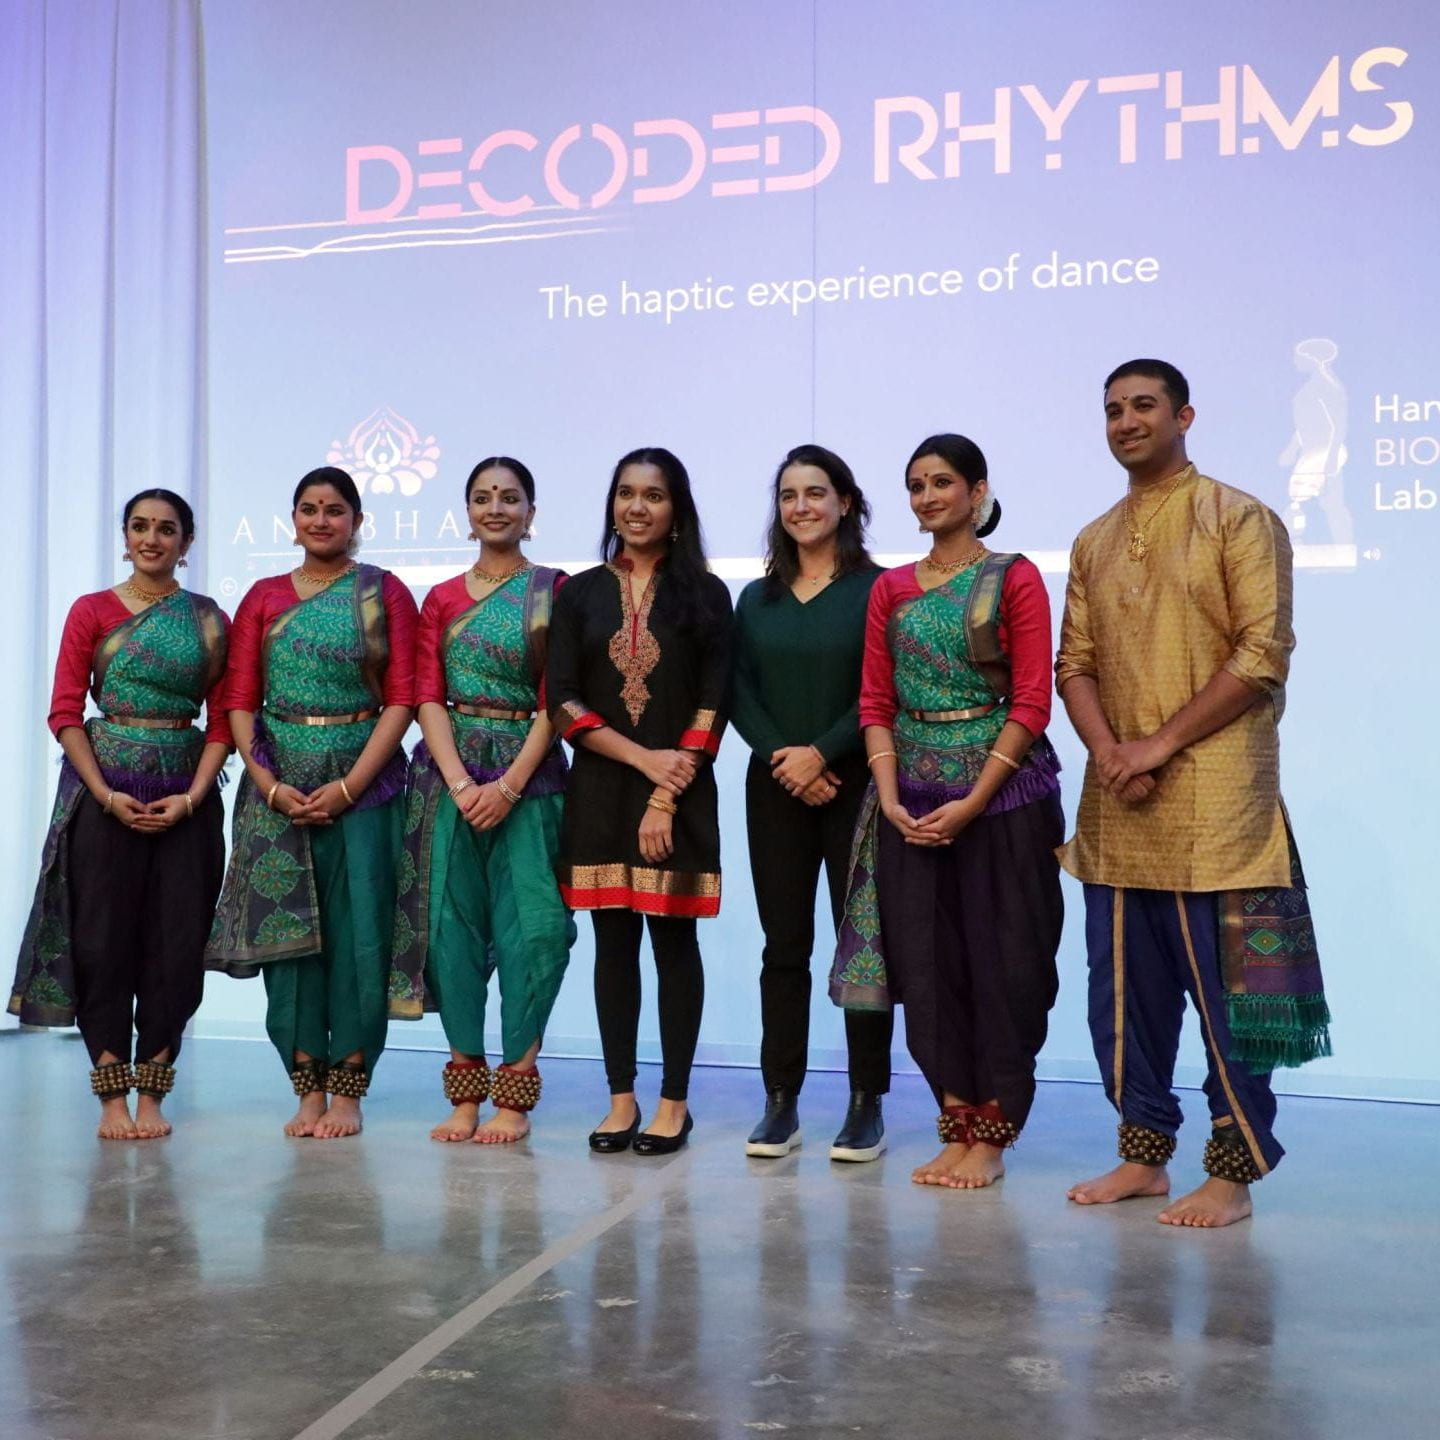 group of dancers posing for picture in front of "Decoded Rhythms" projected title slide